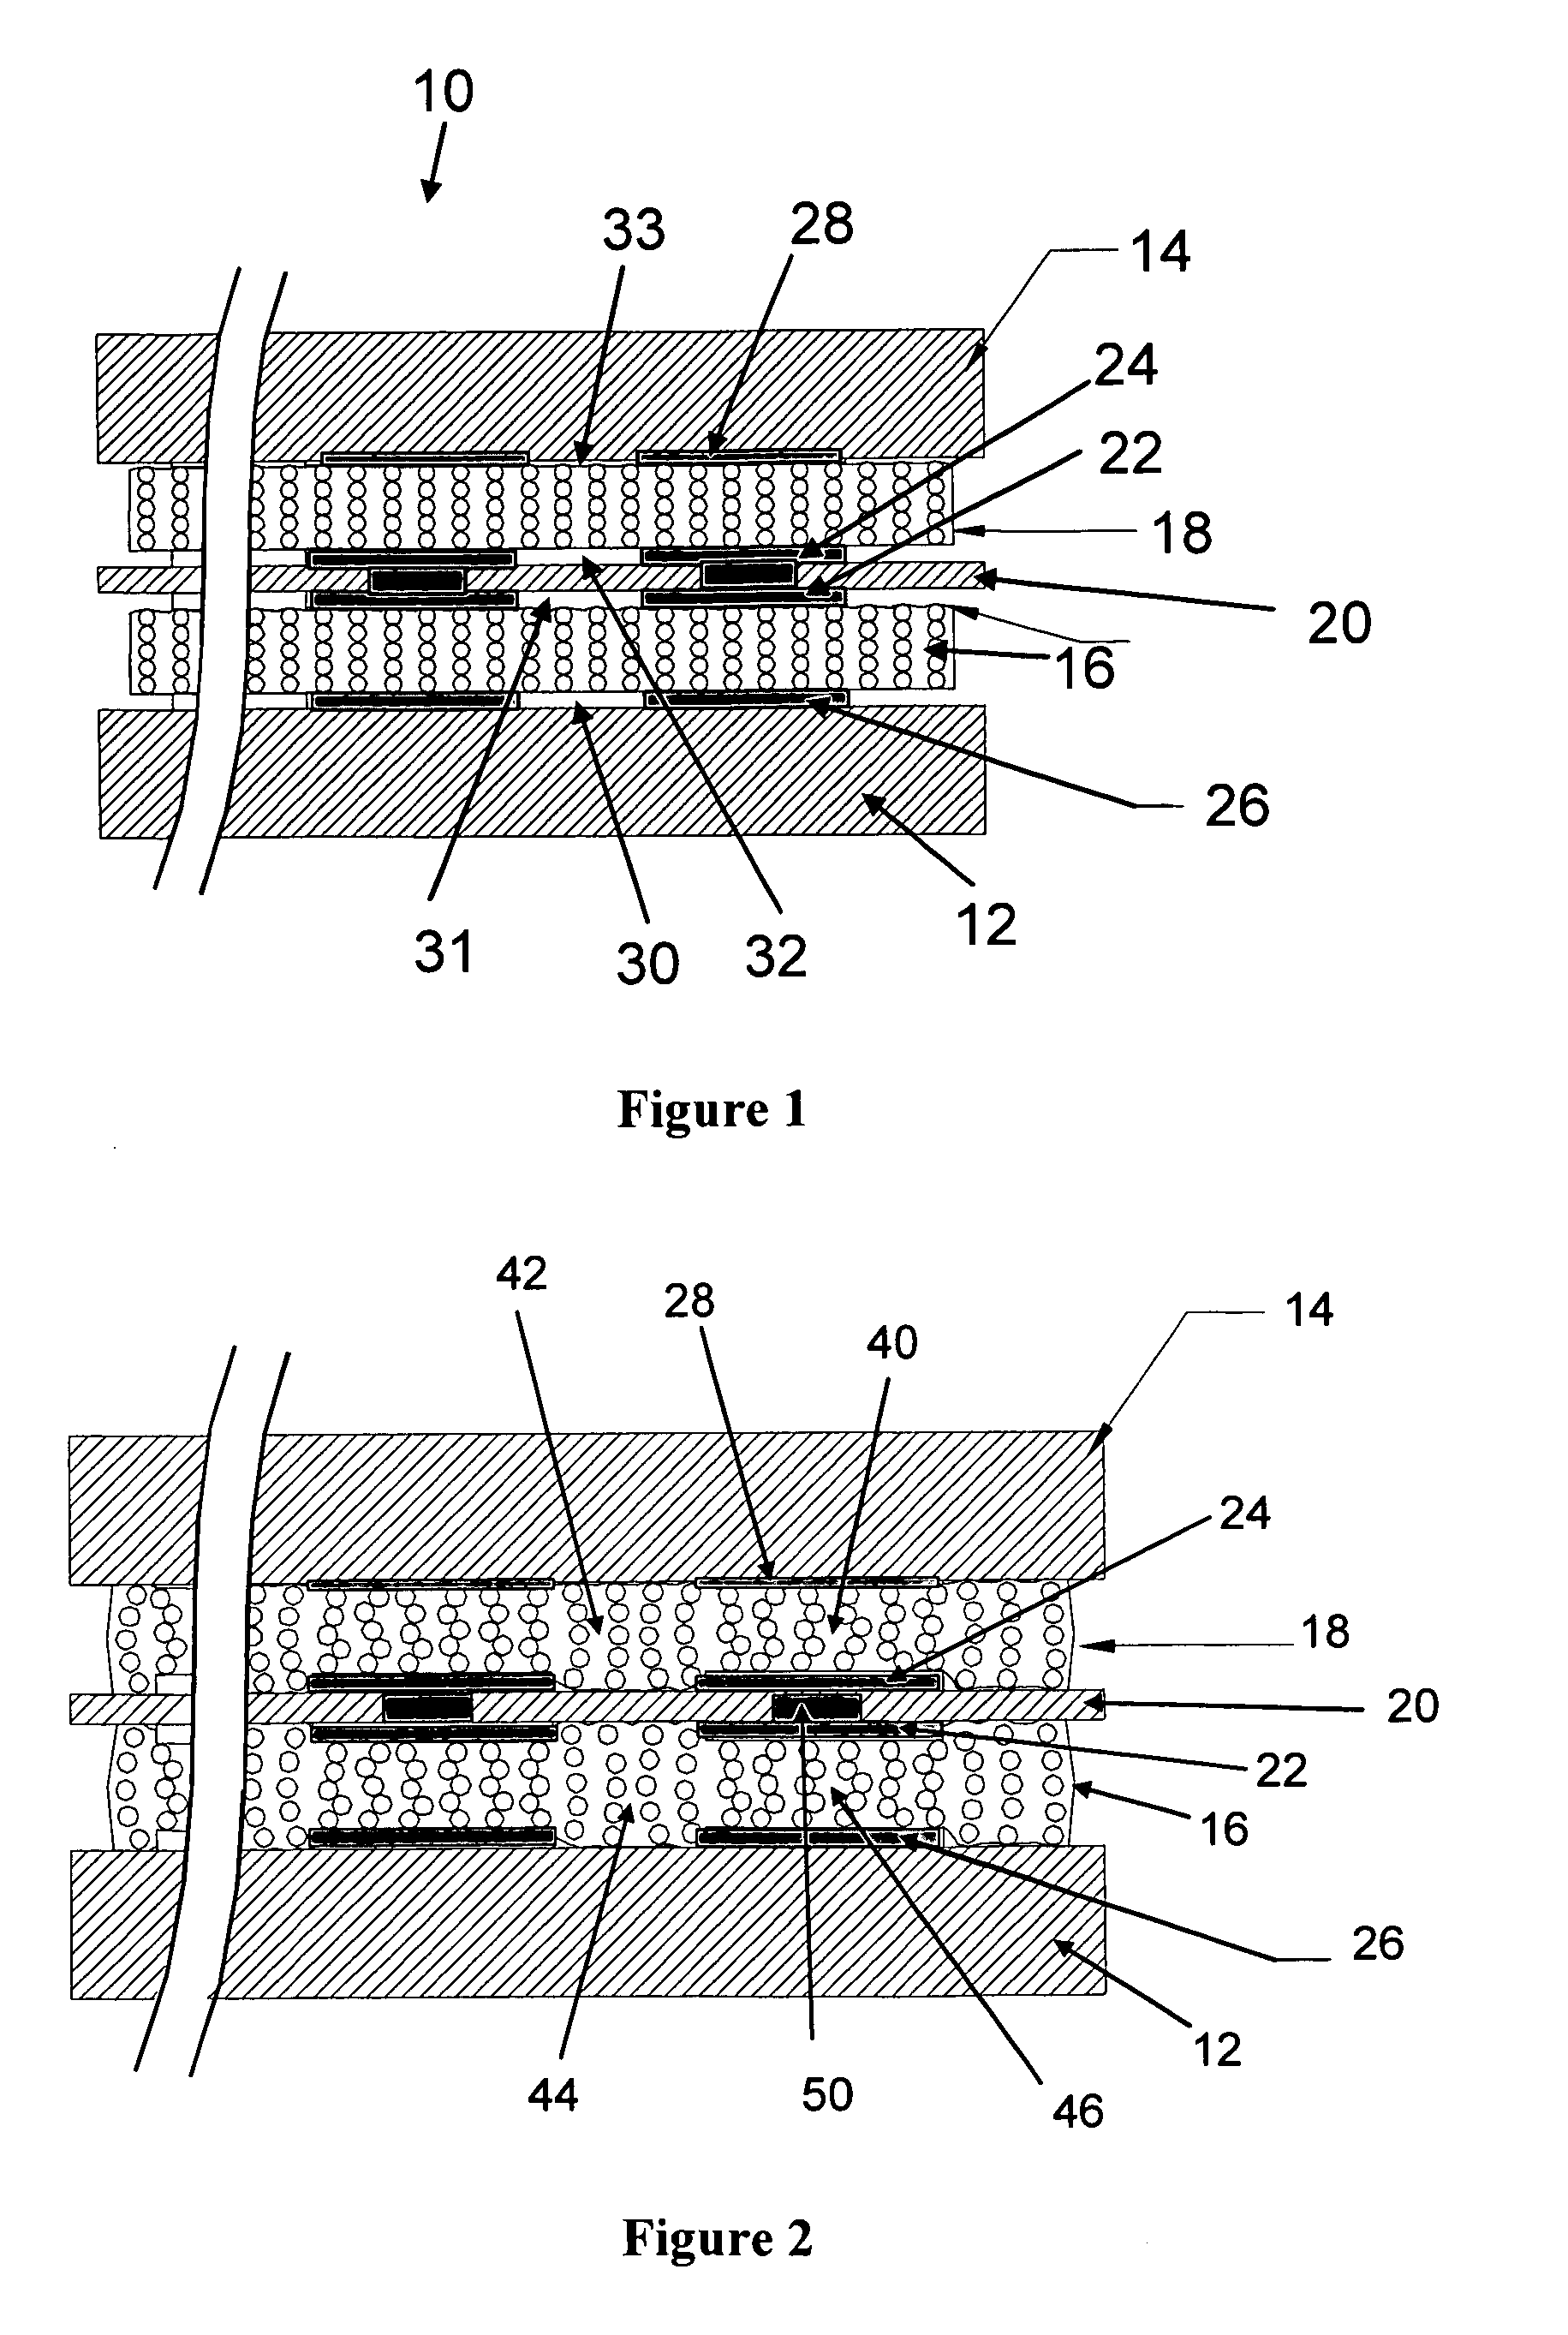 Anisotropic conductive elastomer based electrical interconnect with enhanced dynamic range